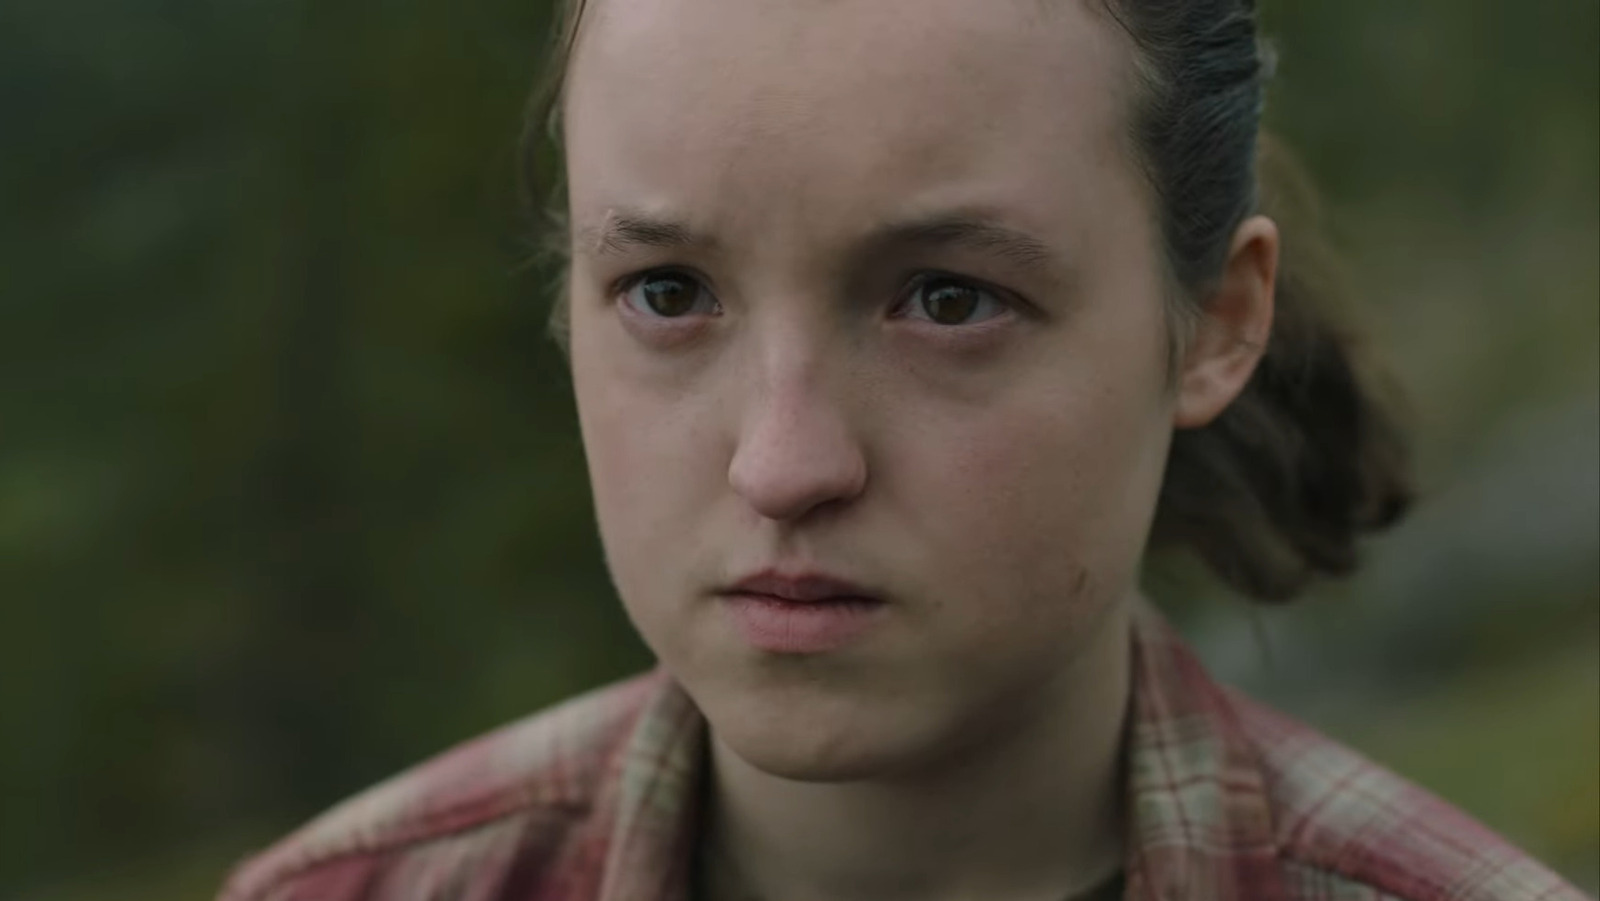 Image of Bella Ramsey as Ellie on 'The last of Us' on HBO. Close-up image of Ellie, who is outdoors and looking at something with a serious expression. Her dark hair is pulled back into a pony tail, and she's wearing a red plaid collared shirt. 